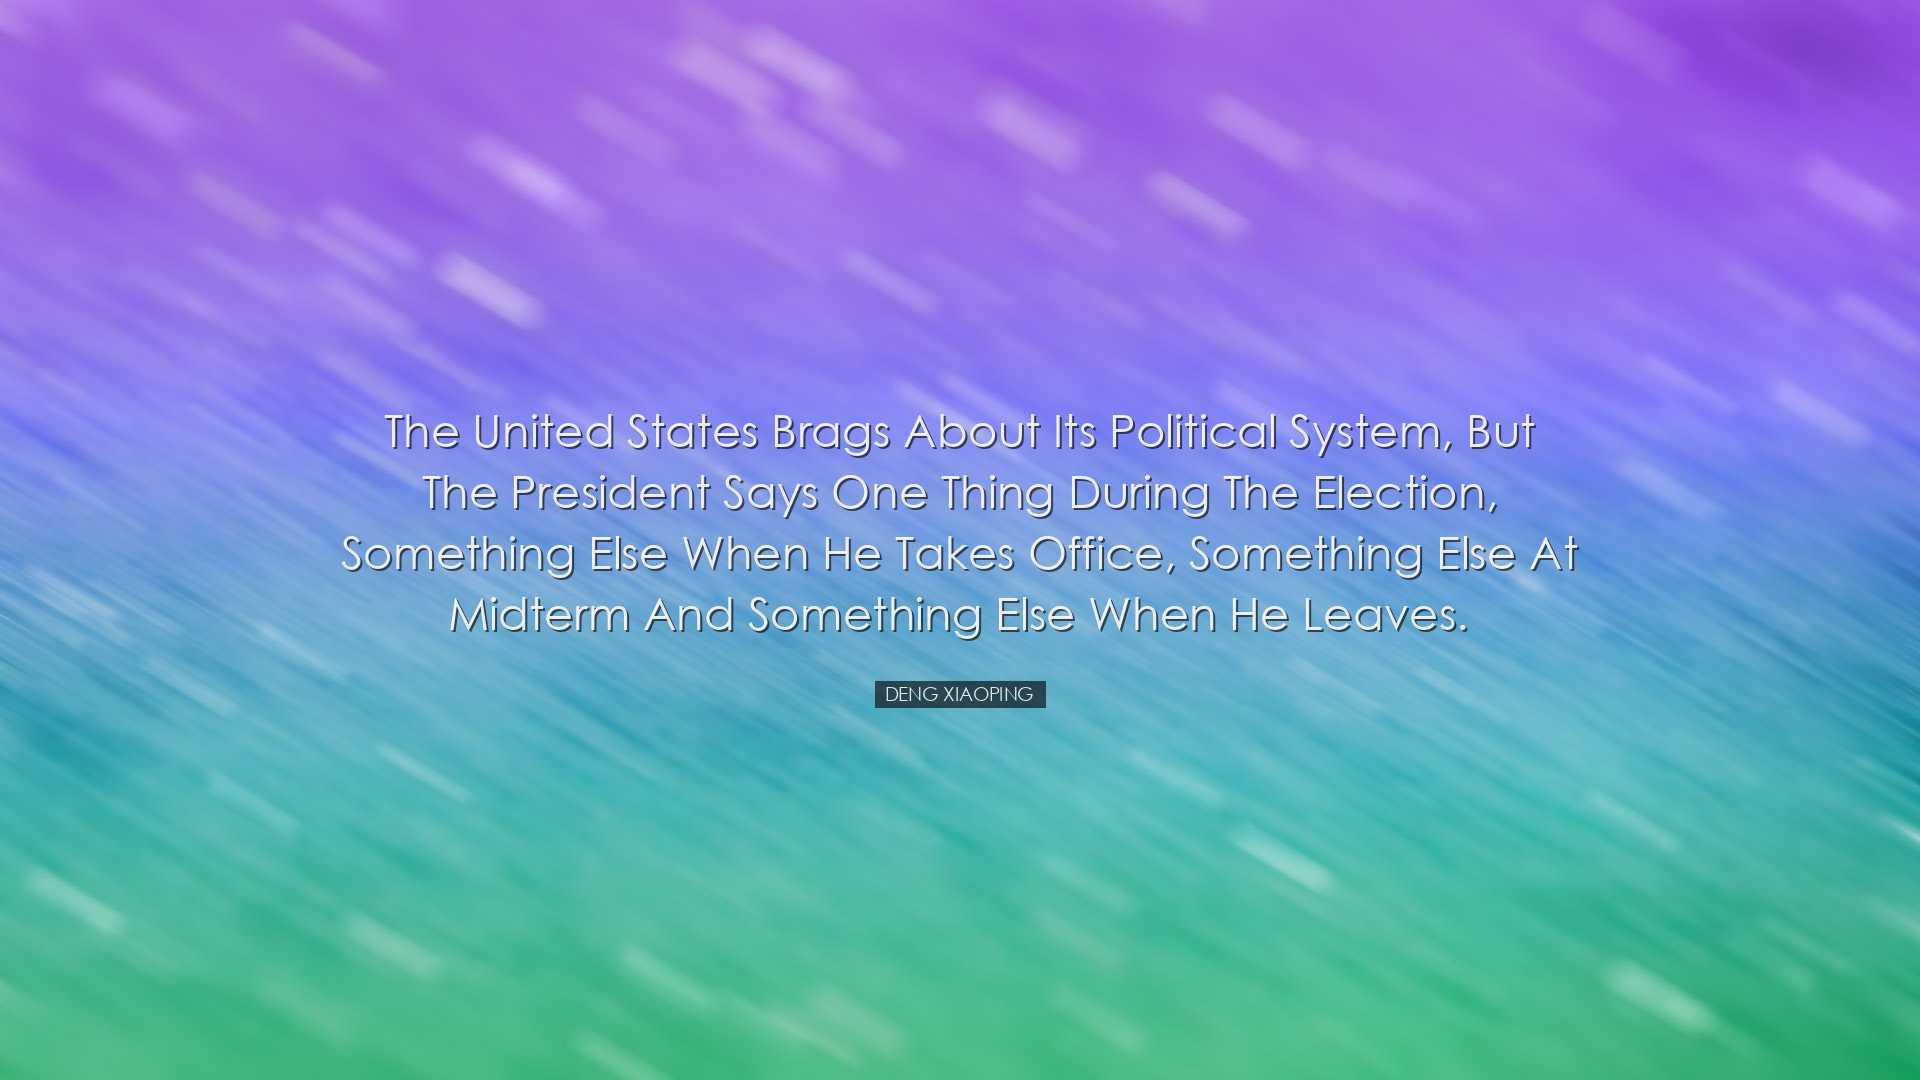 The United States brags about its political system, but the Presid